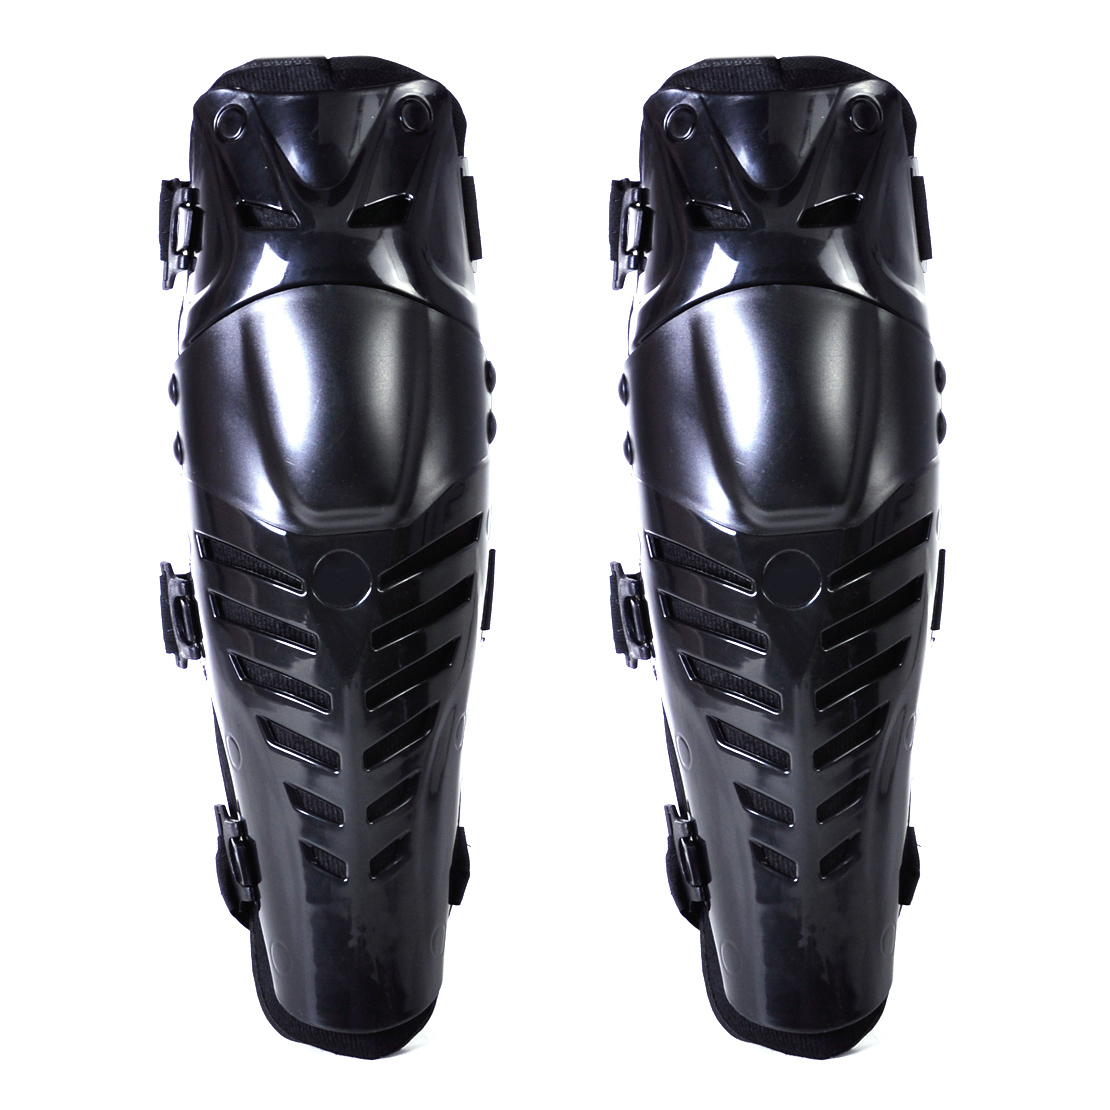 1 Pair Adults Knee Protector Guard Pad Shin Armor fit Bike Motorcycle ...